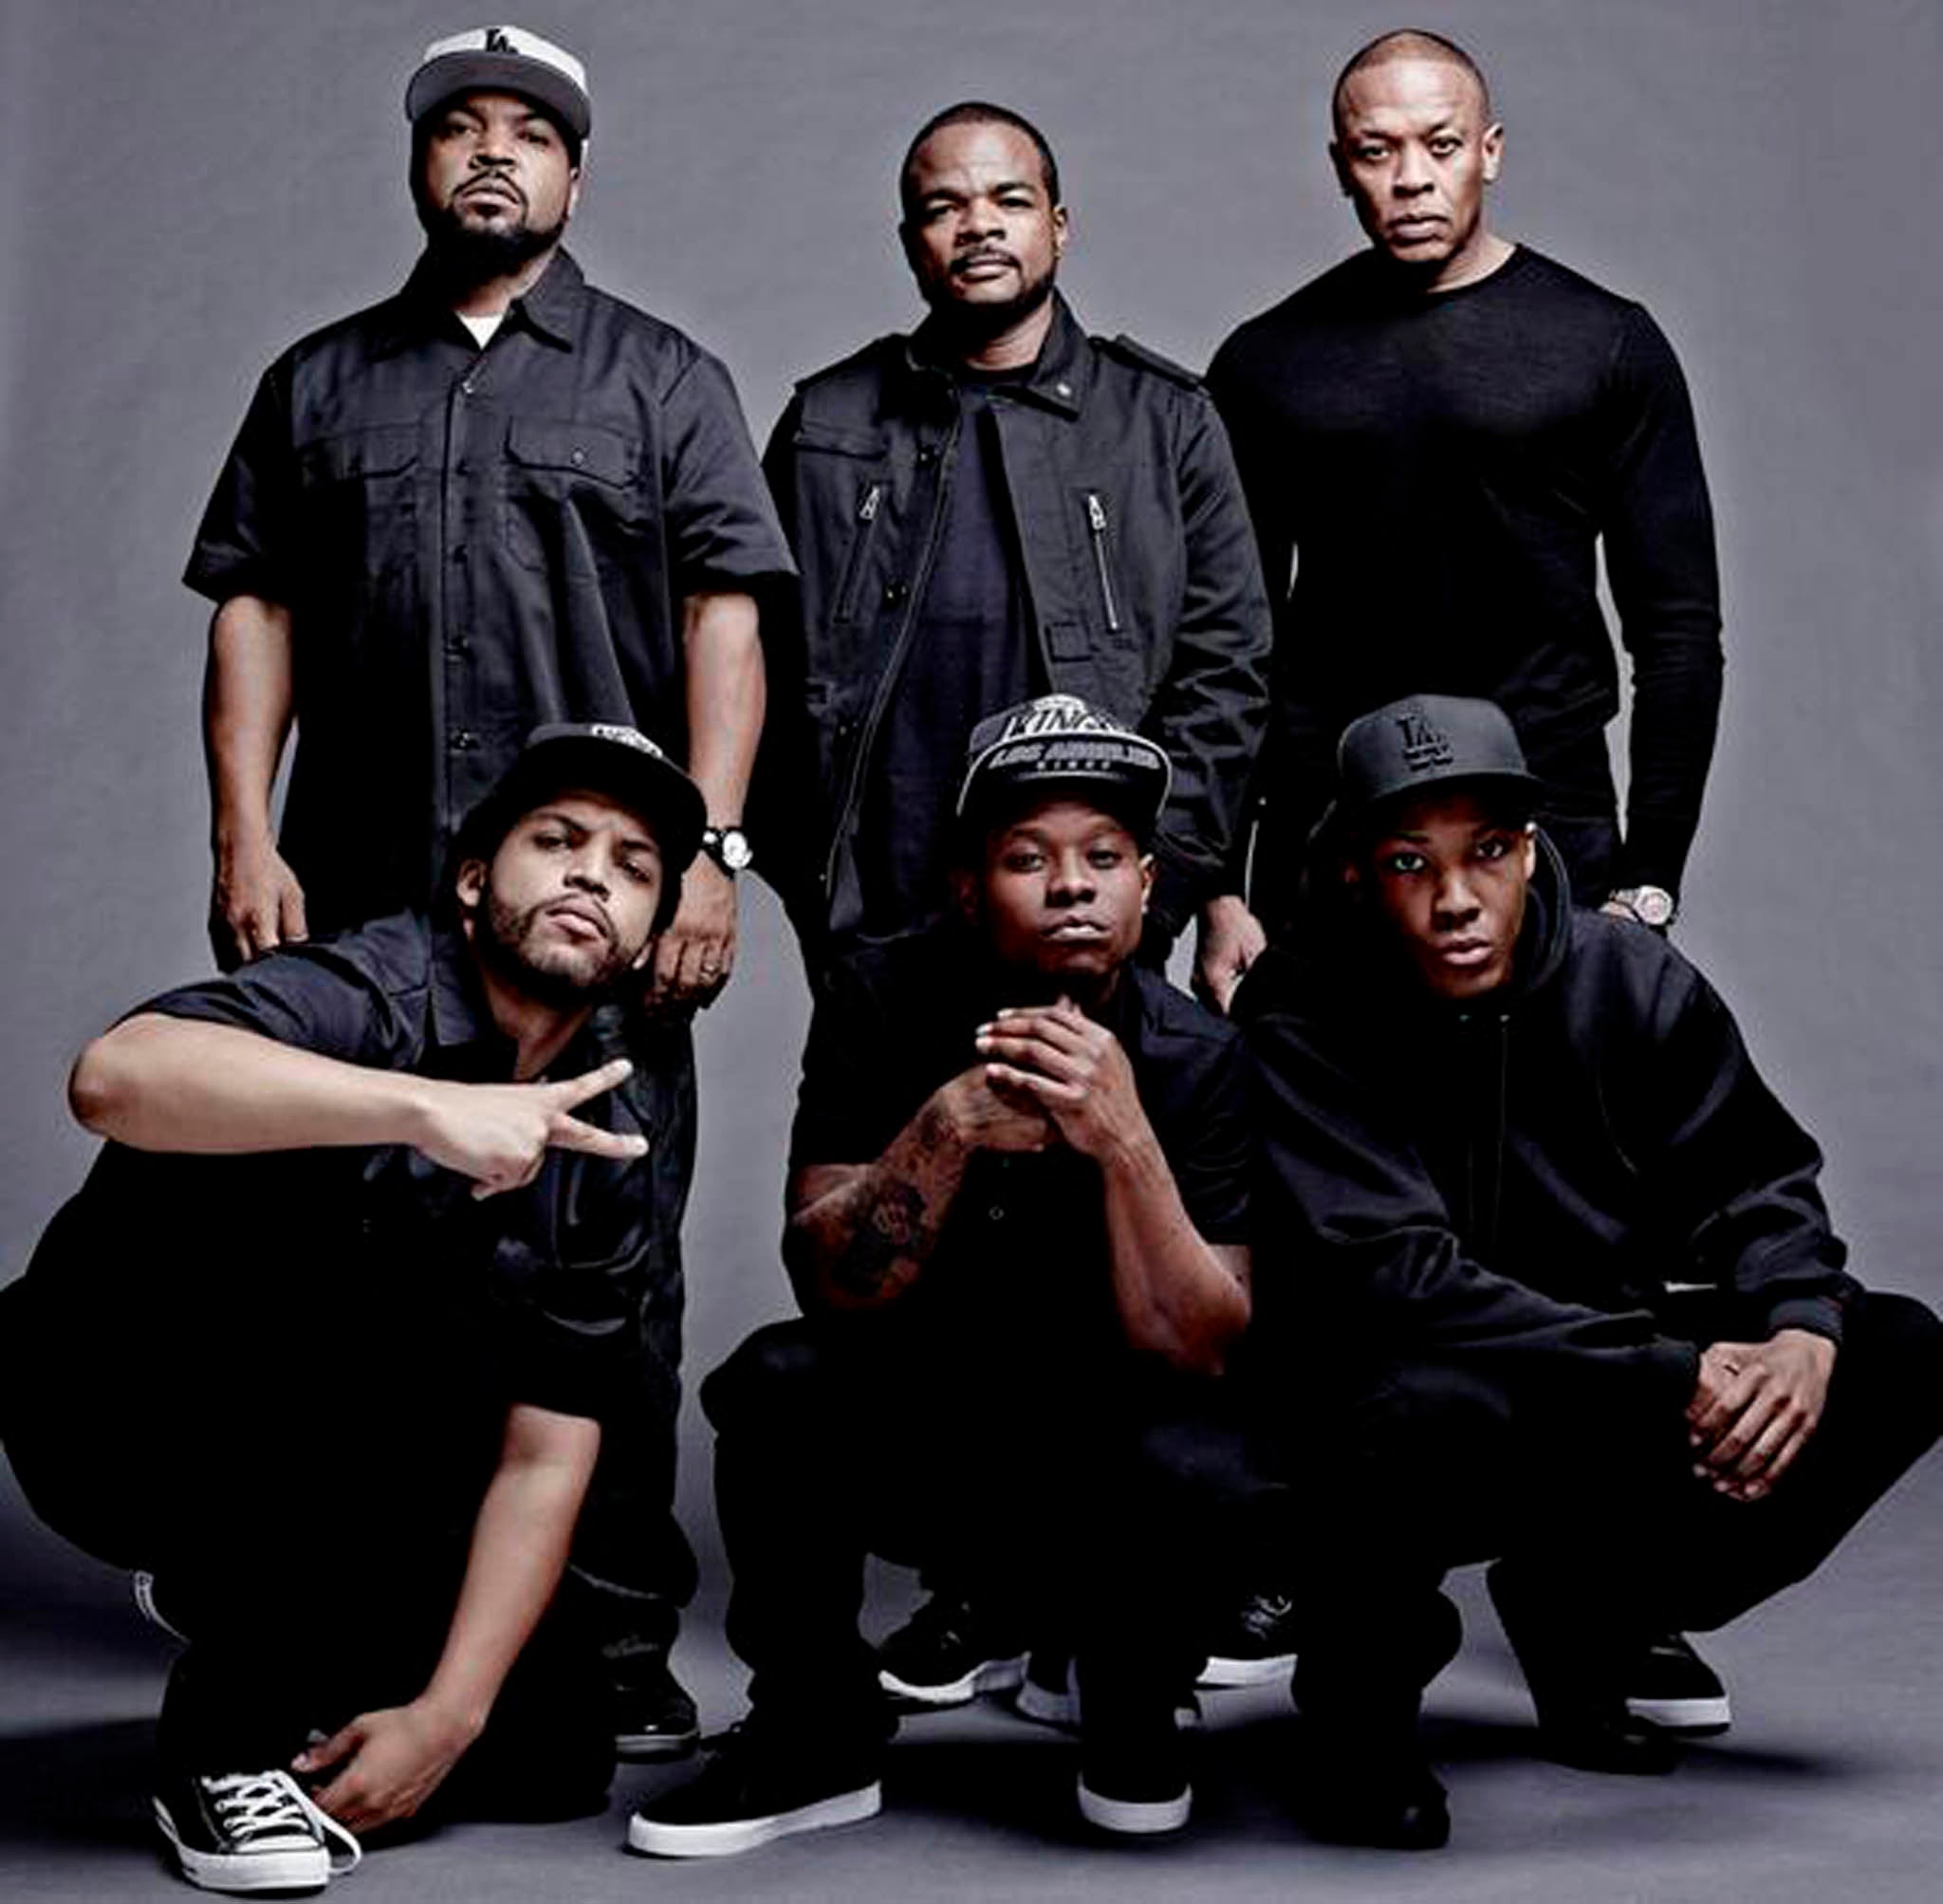 Ice Cube and Dr Dre will co-produce the biopic